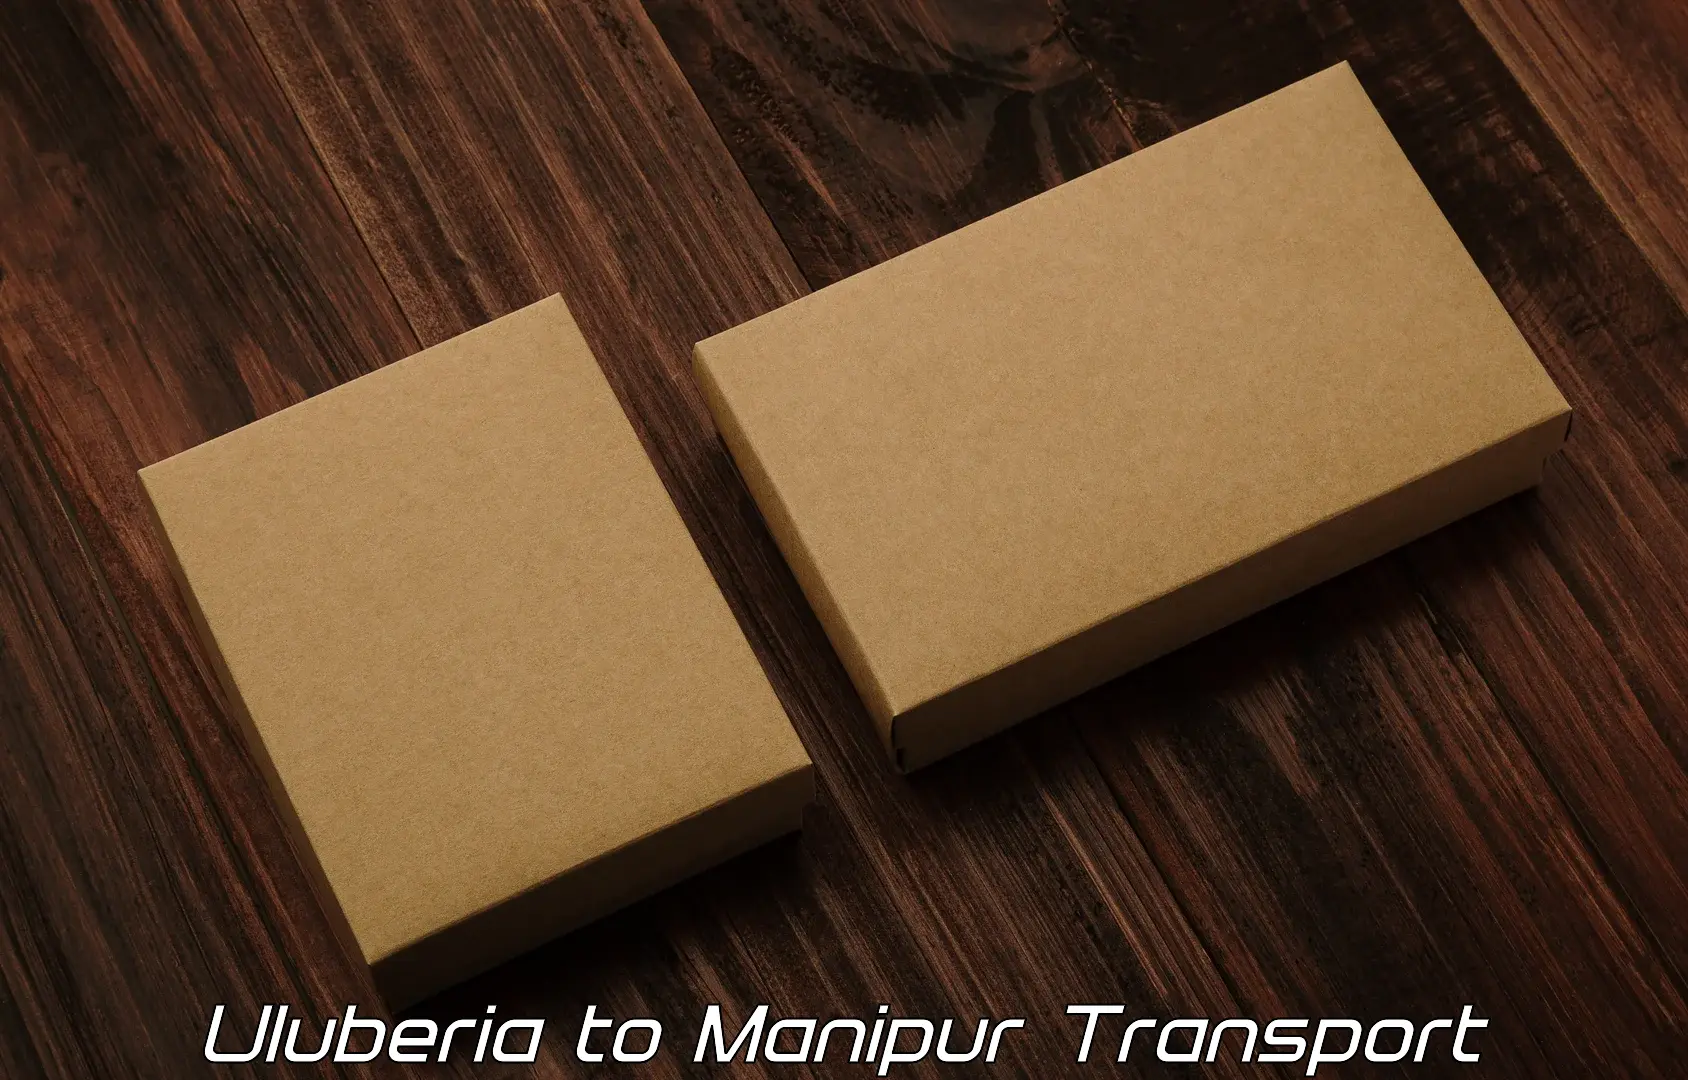 Express transport services Uluberia to Manipur